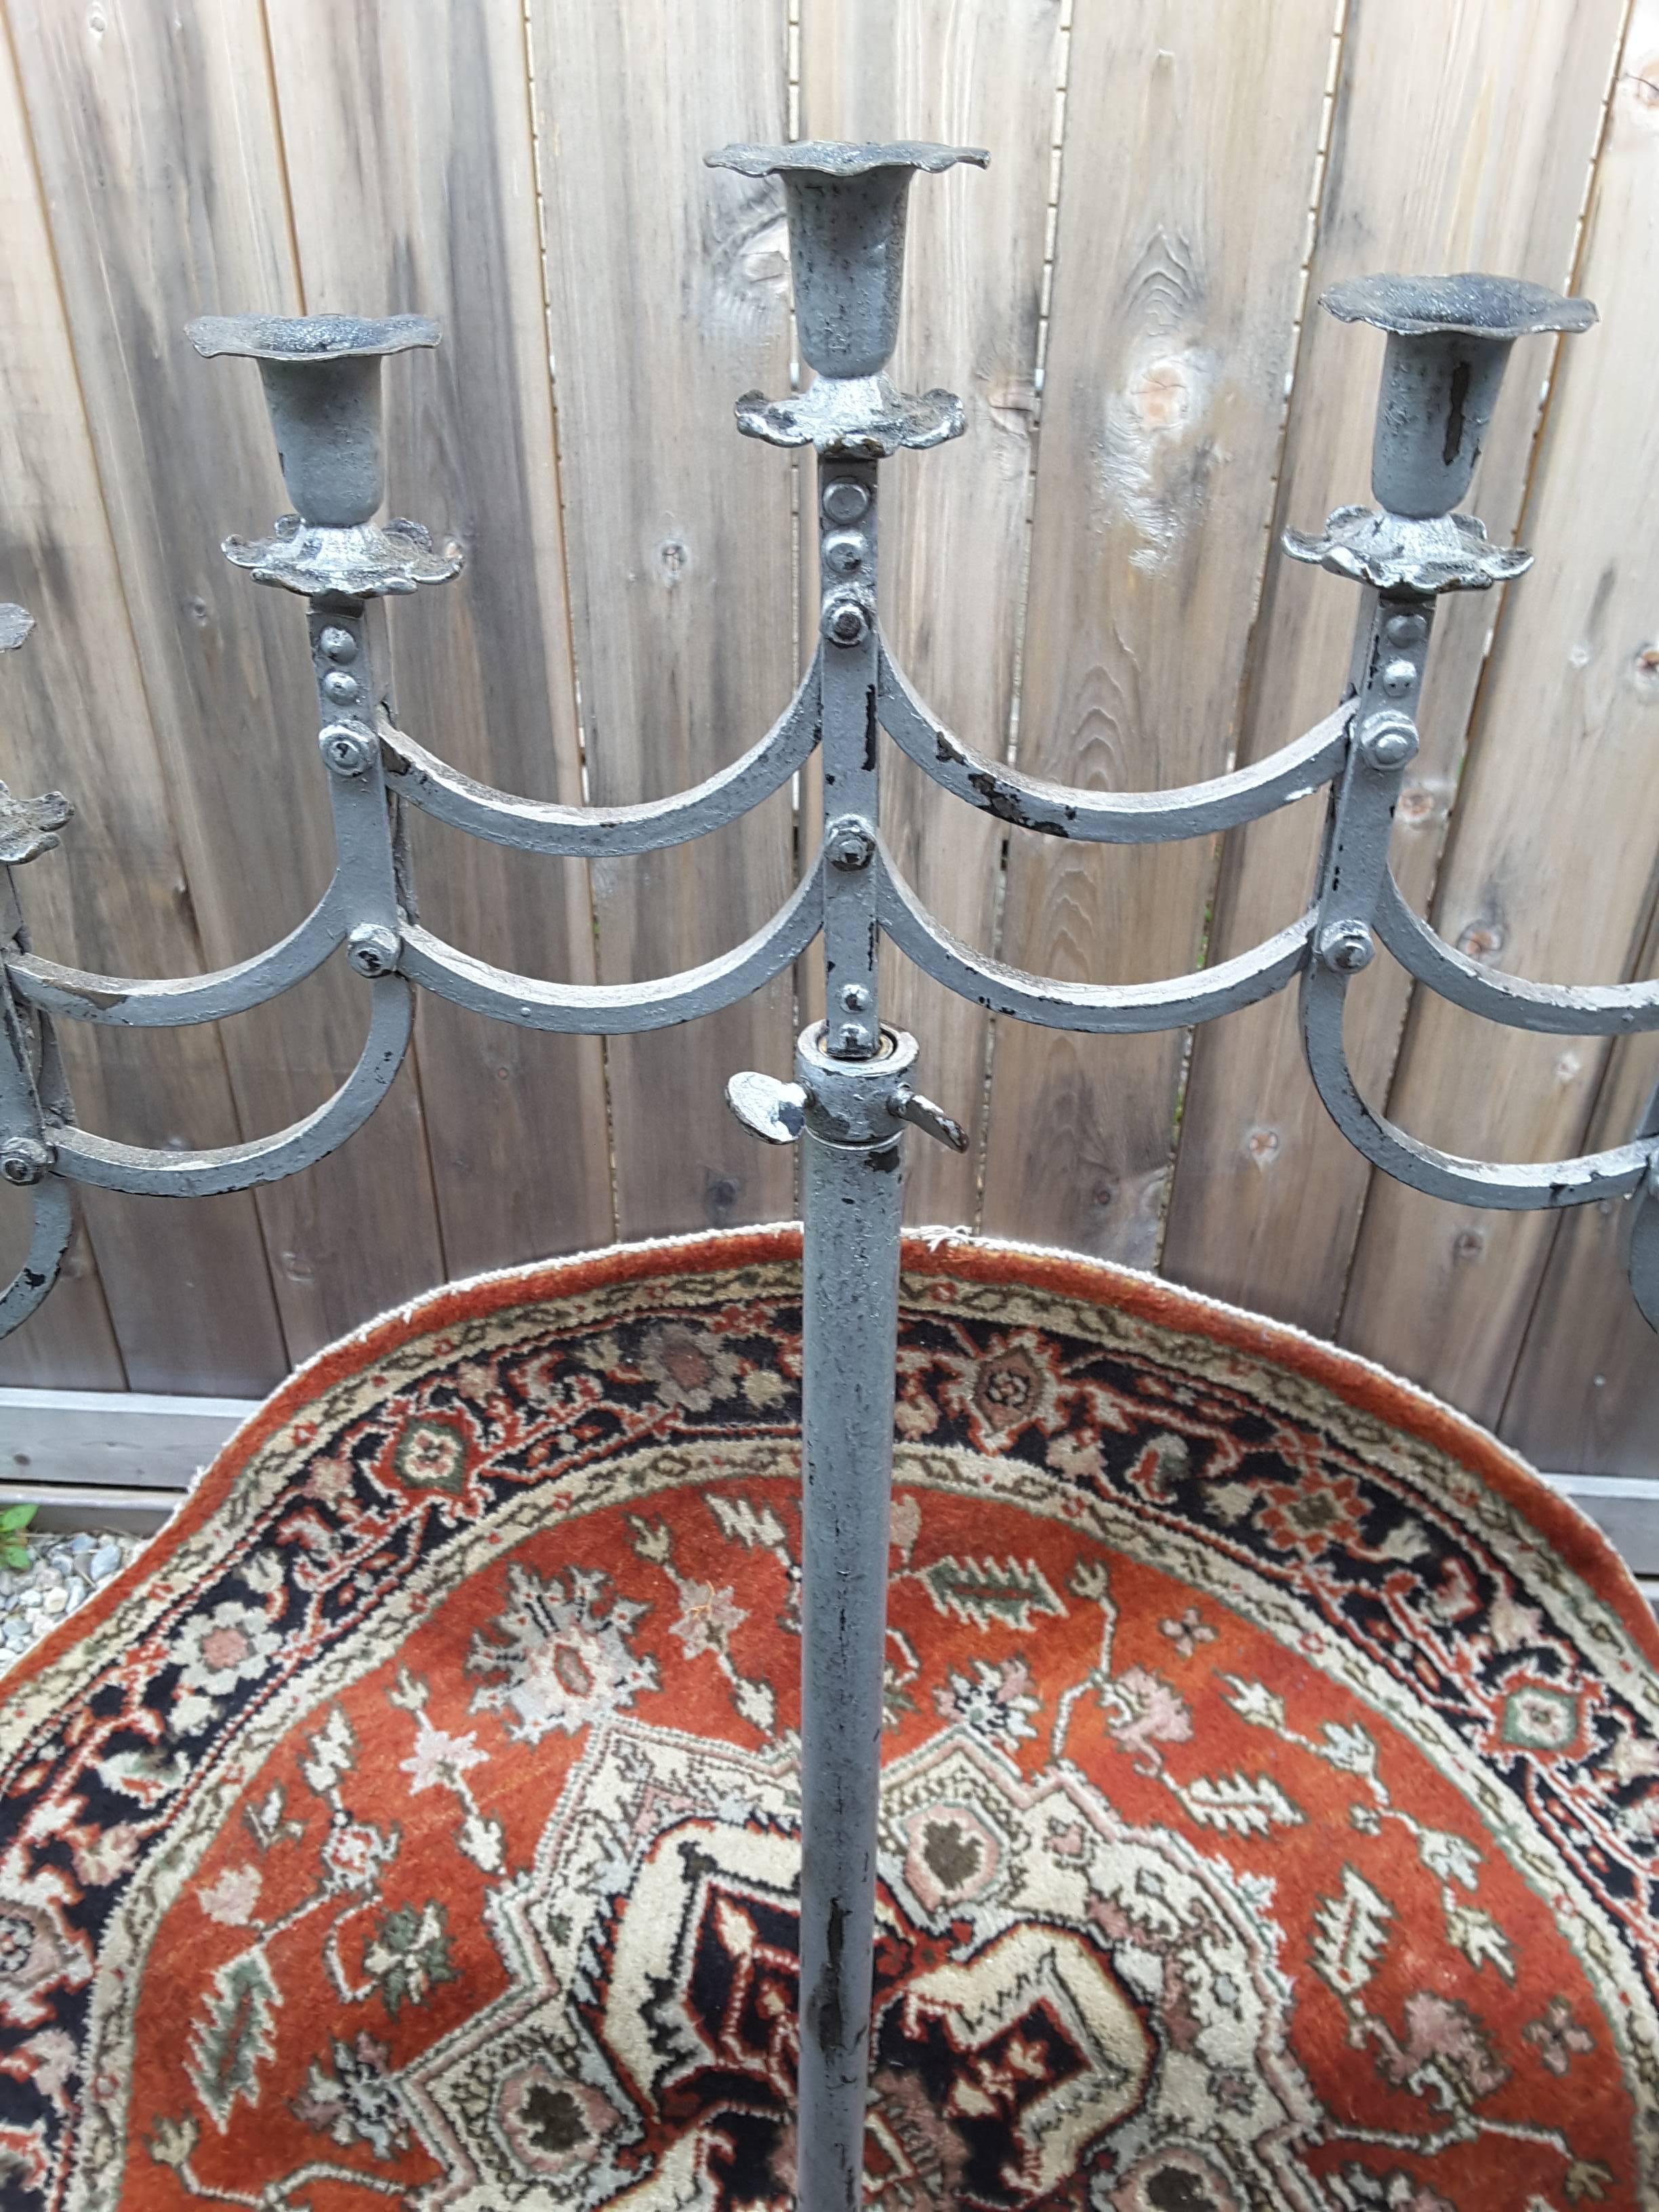 Neoclassical Wrought Iron Candelabra with Adjustable Height and Articulated Seven-Arm Holder